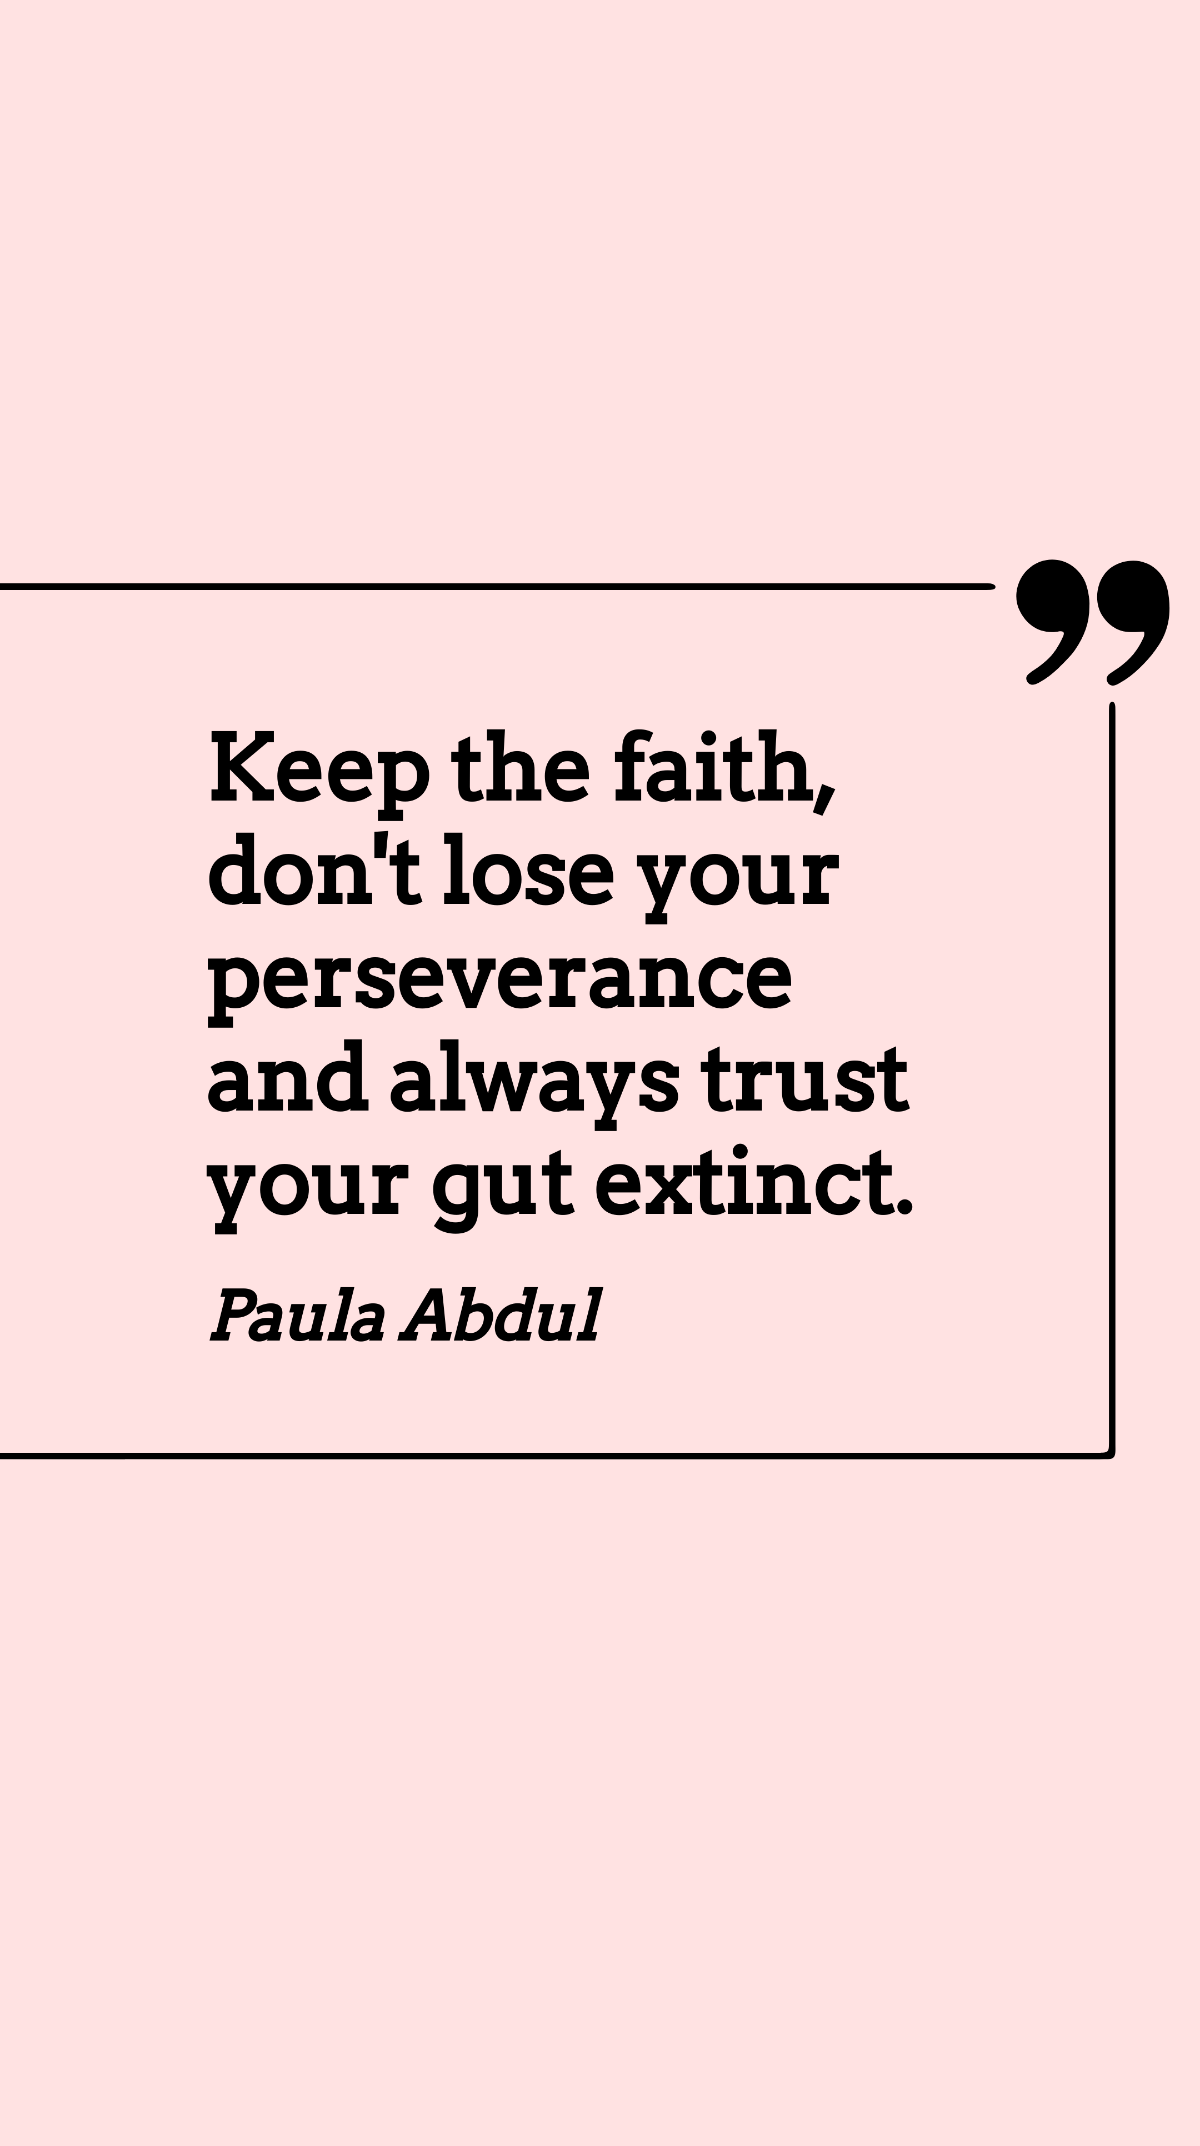 Paula Abdul - Keep the faith, don't lose your perseverance and always trust your gut extinct.